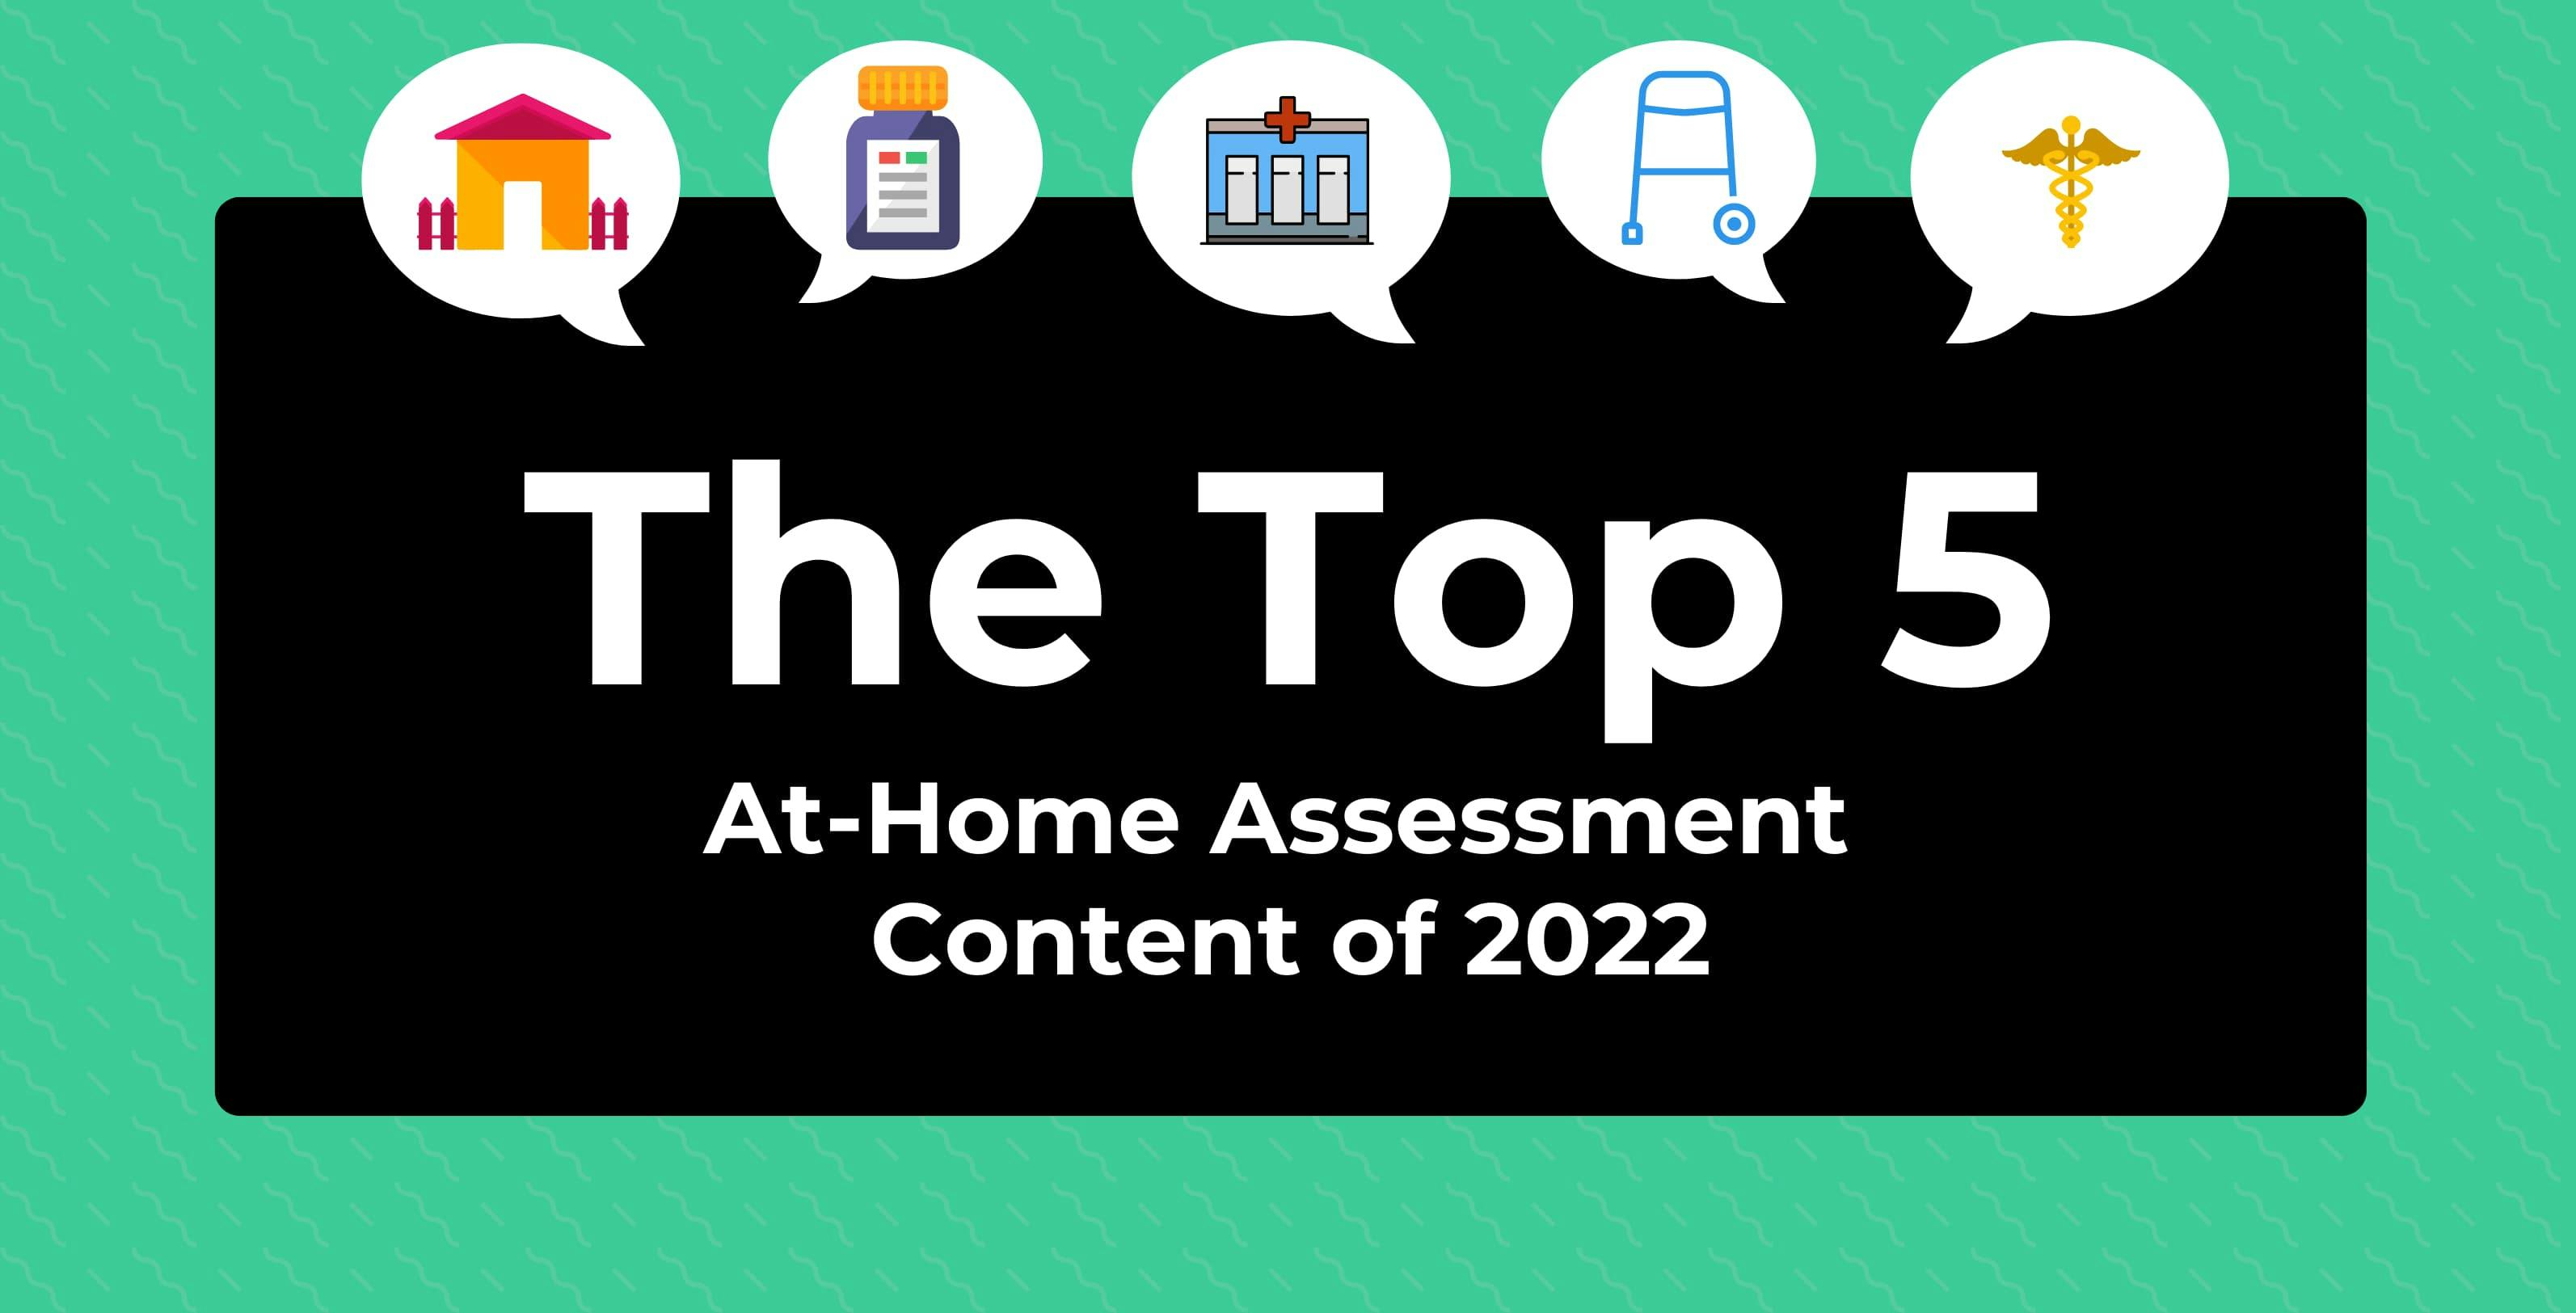 The Top 5 At-Home Assessment Content of 2022